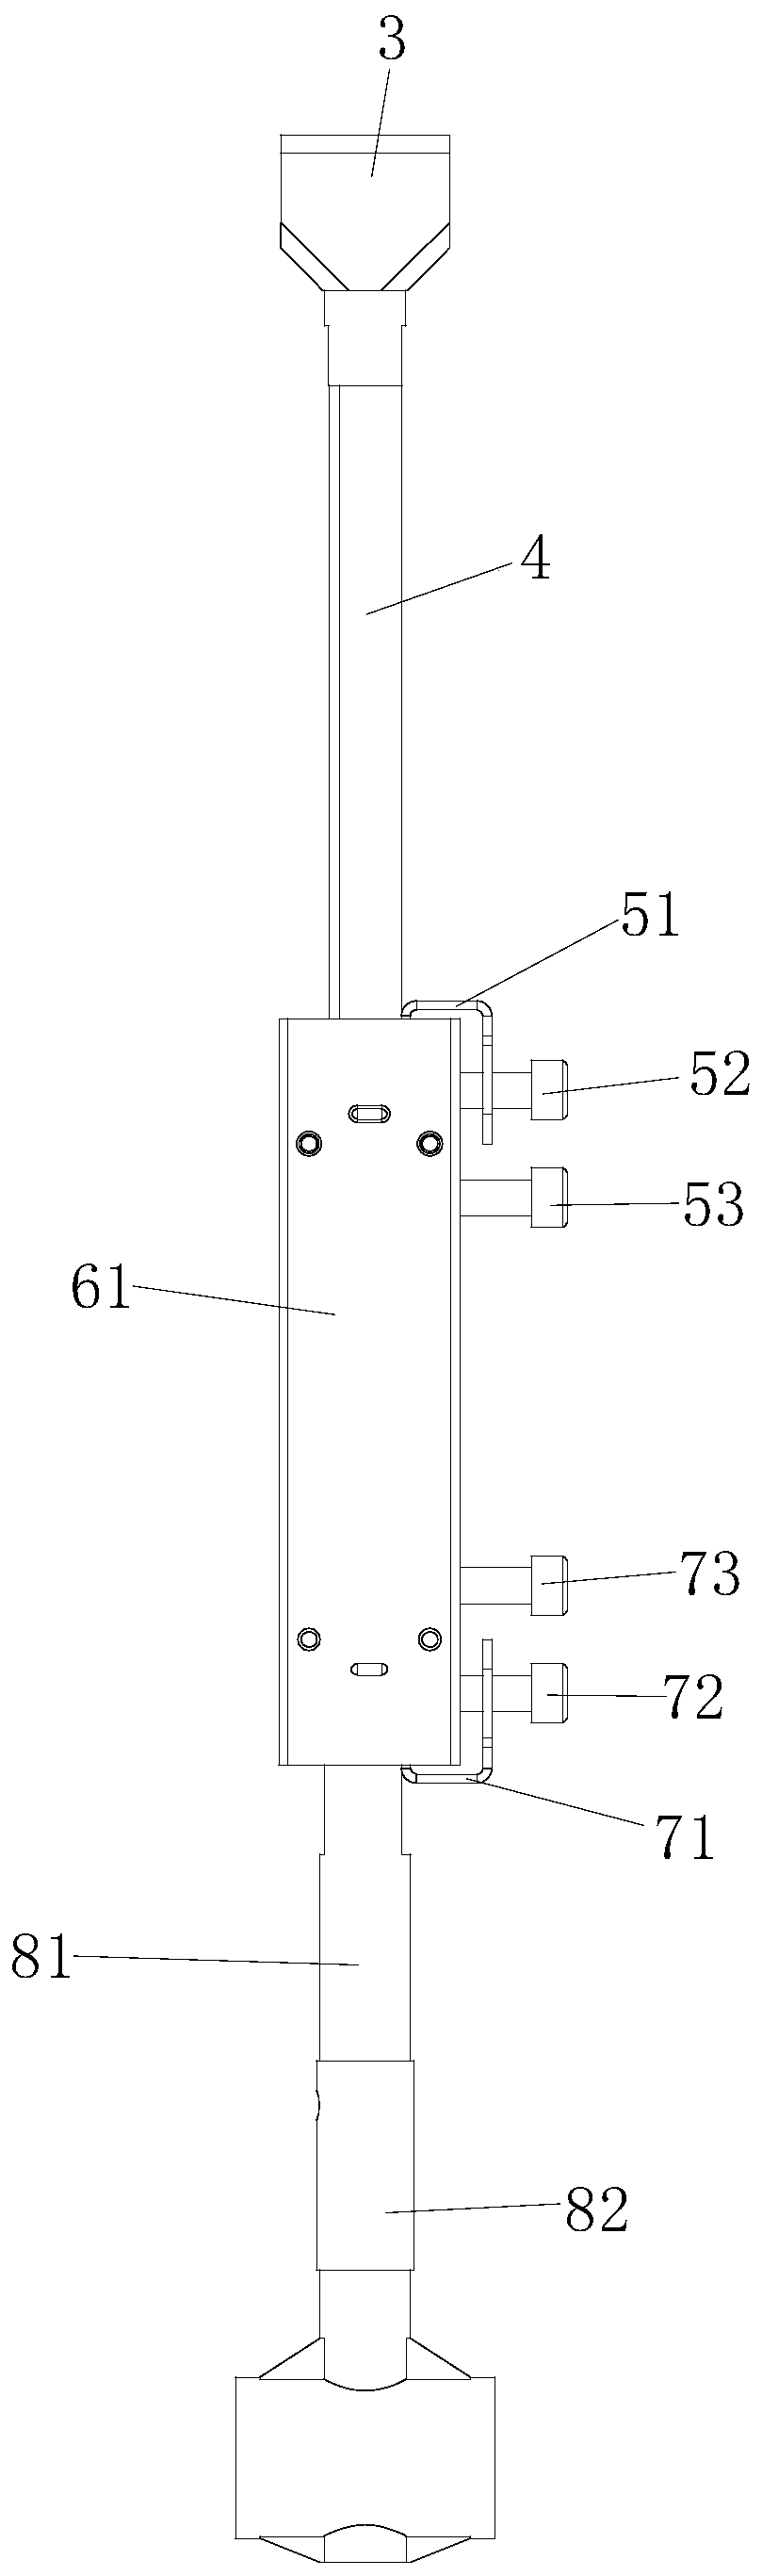 Heald frame connecting device of crank shedding loom